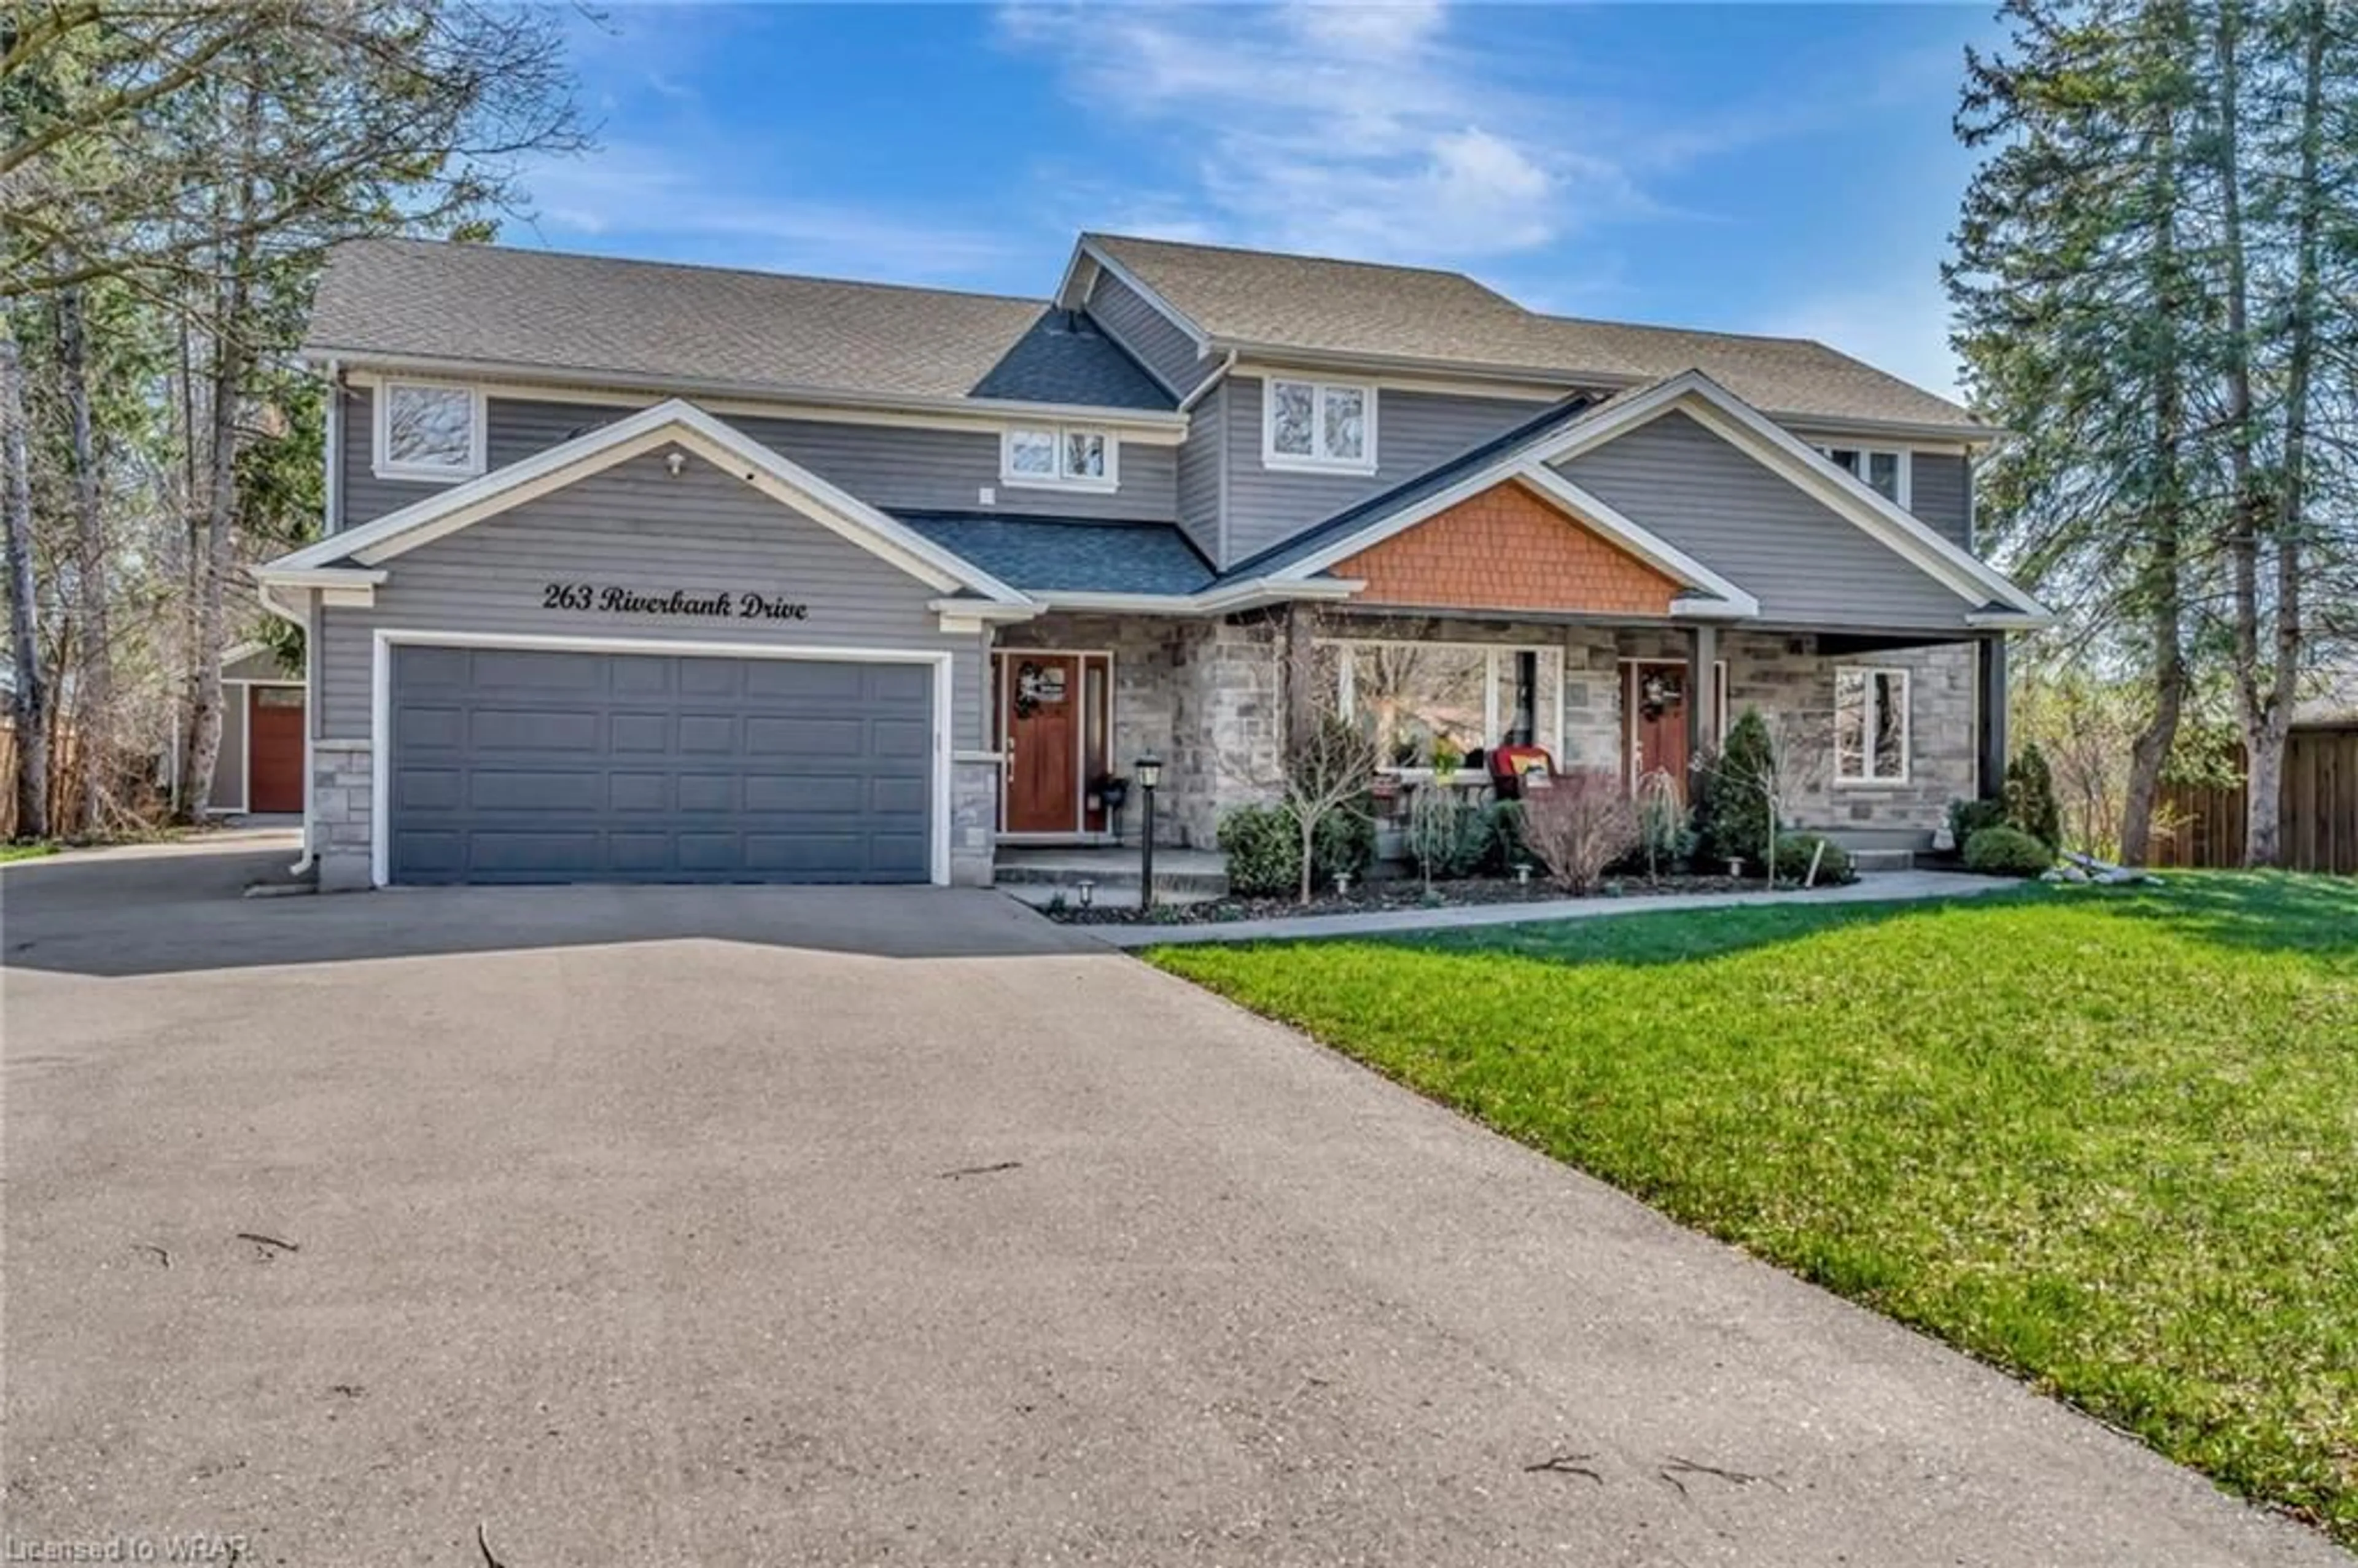 Frontside or backside of a home for 263 Riverbank Dr, Cambridge Ontario N3H 4R6